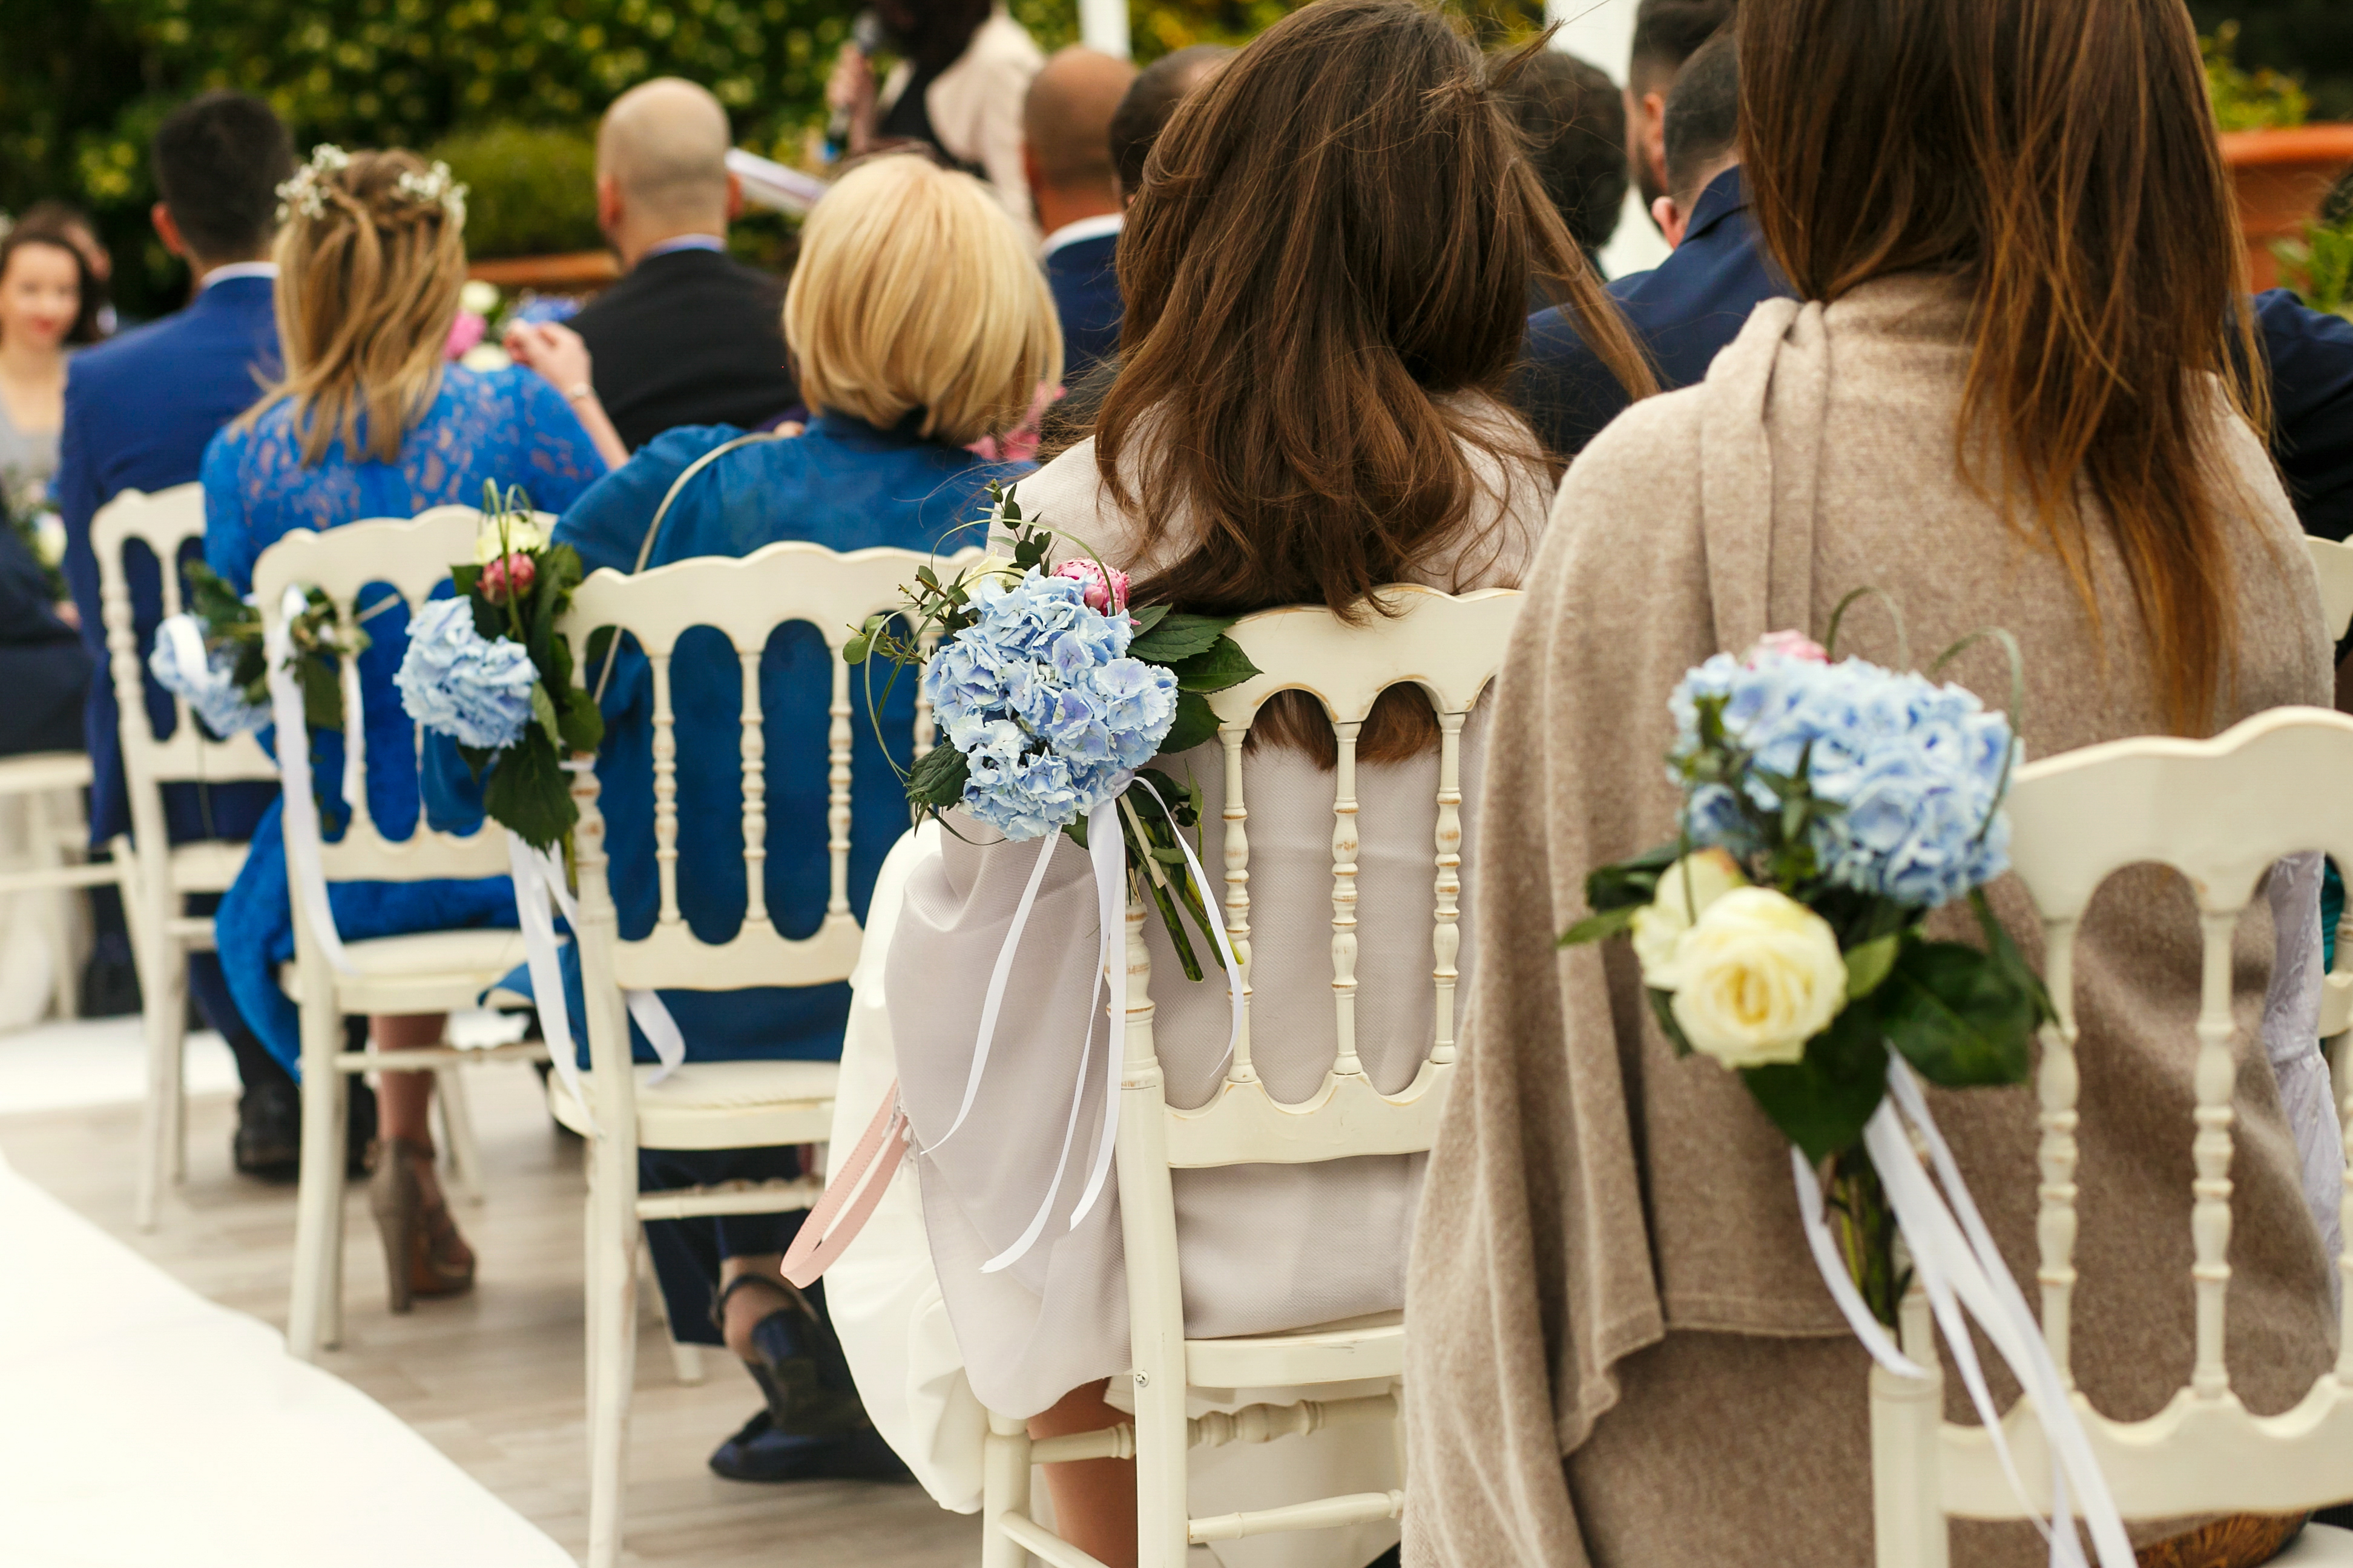 Guests at a wedding | Source: Shutterstock